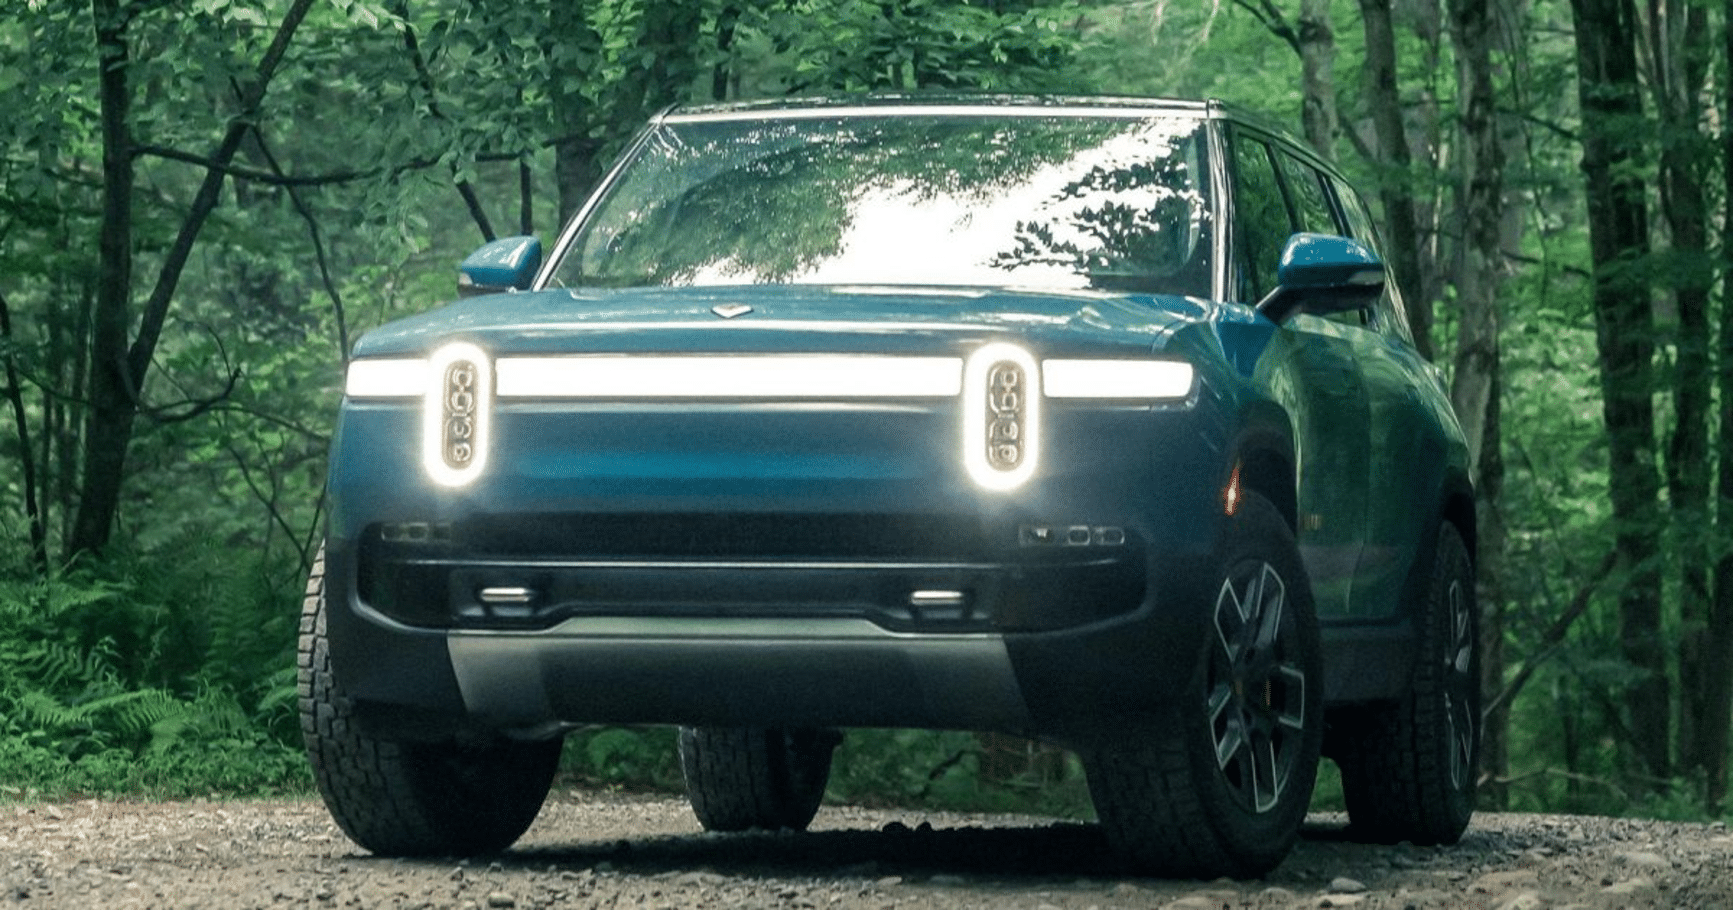 Rivian’s Next-Generation Vehicles to Take on Tesla with New Network Architecture